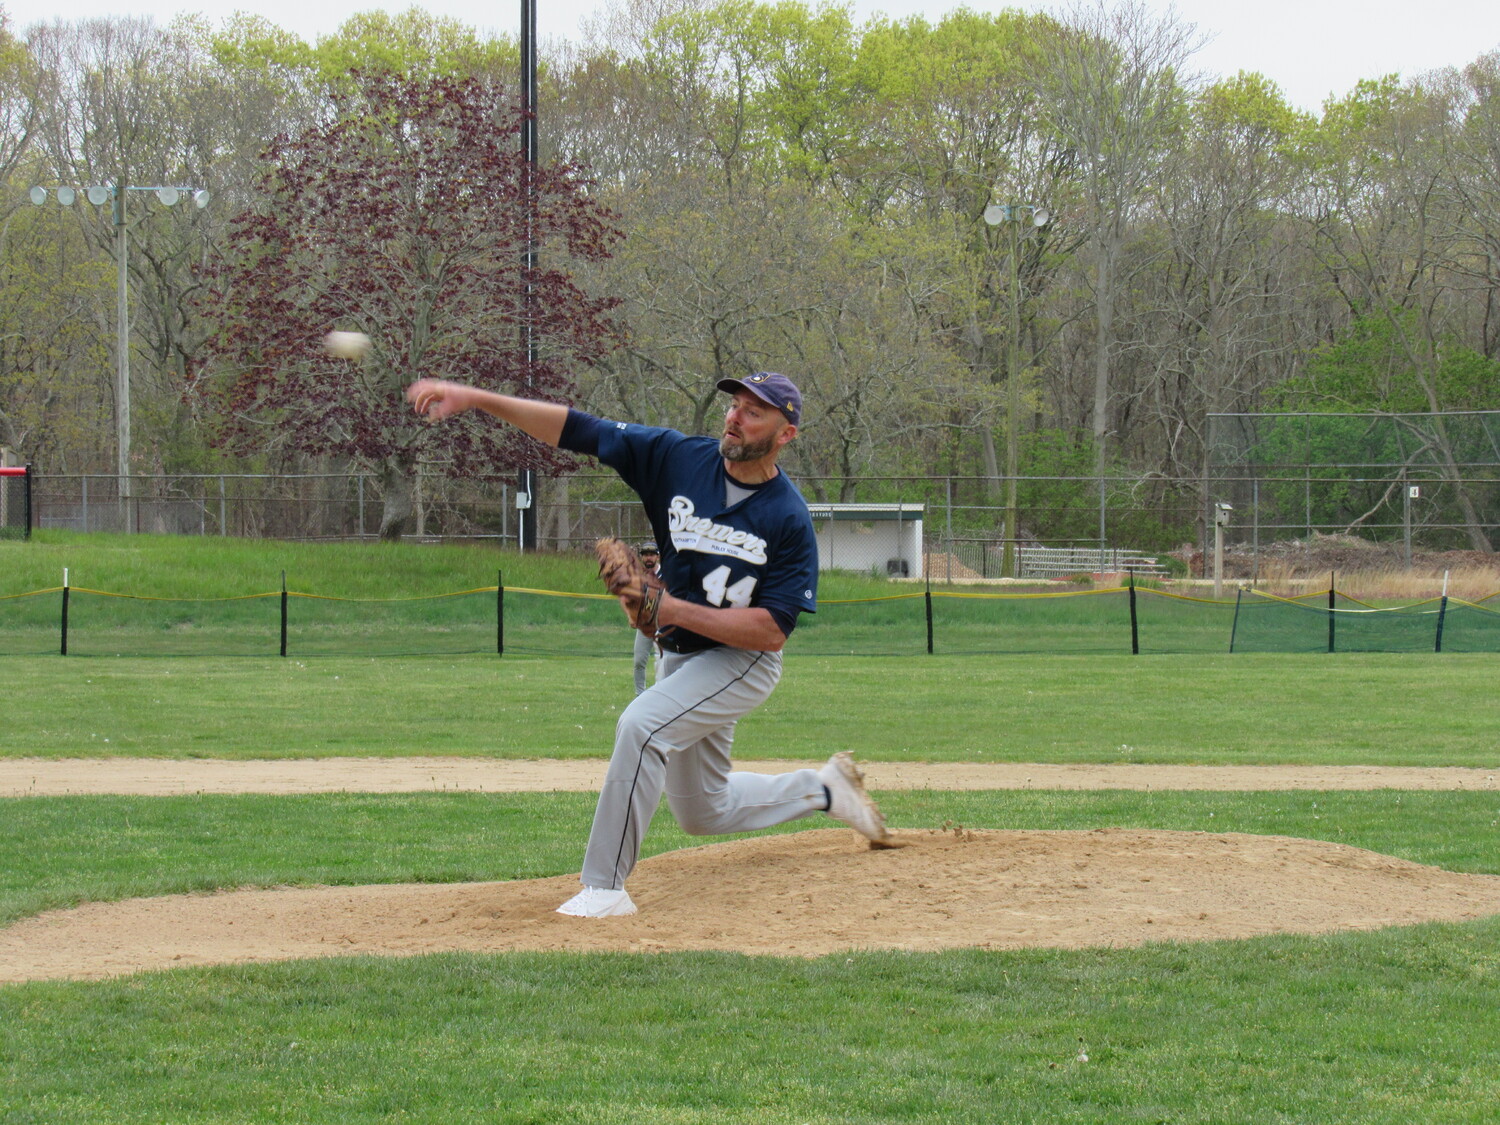 Following the 2023 Championship Game, Hamptons Adult Hardball got its 2024 season underway when the Publick House Brewers took on Team Mexico. The Brewers won, 9-3.   HAMPTON ADULT HARDBALL